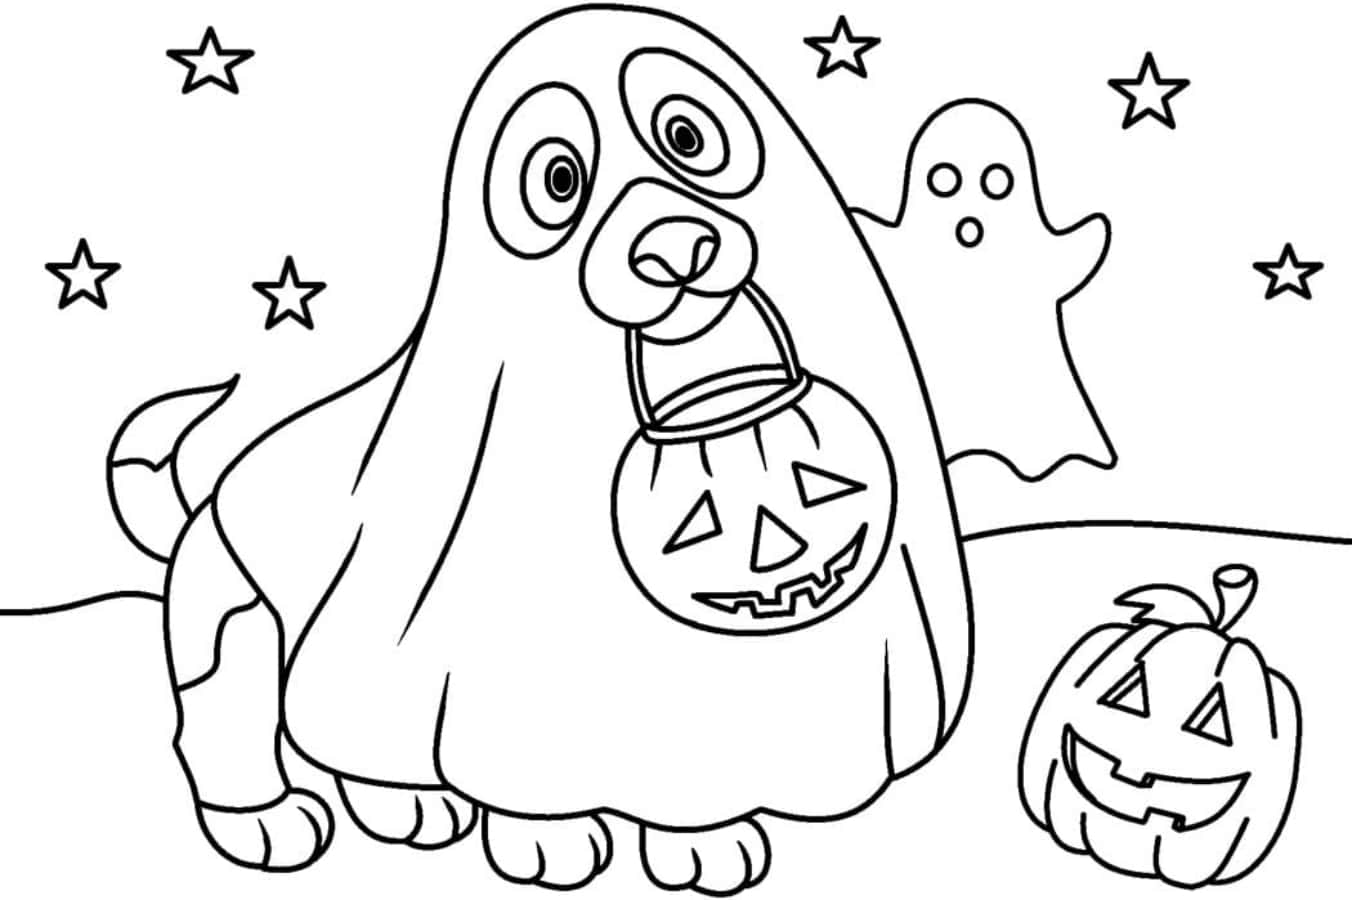 Download halloween dog coloring page picture